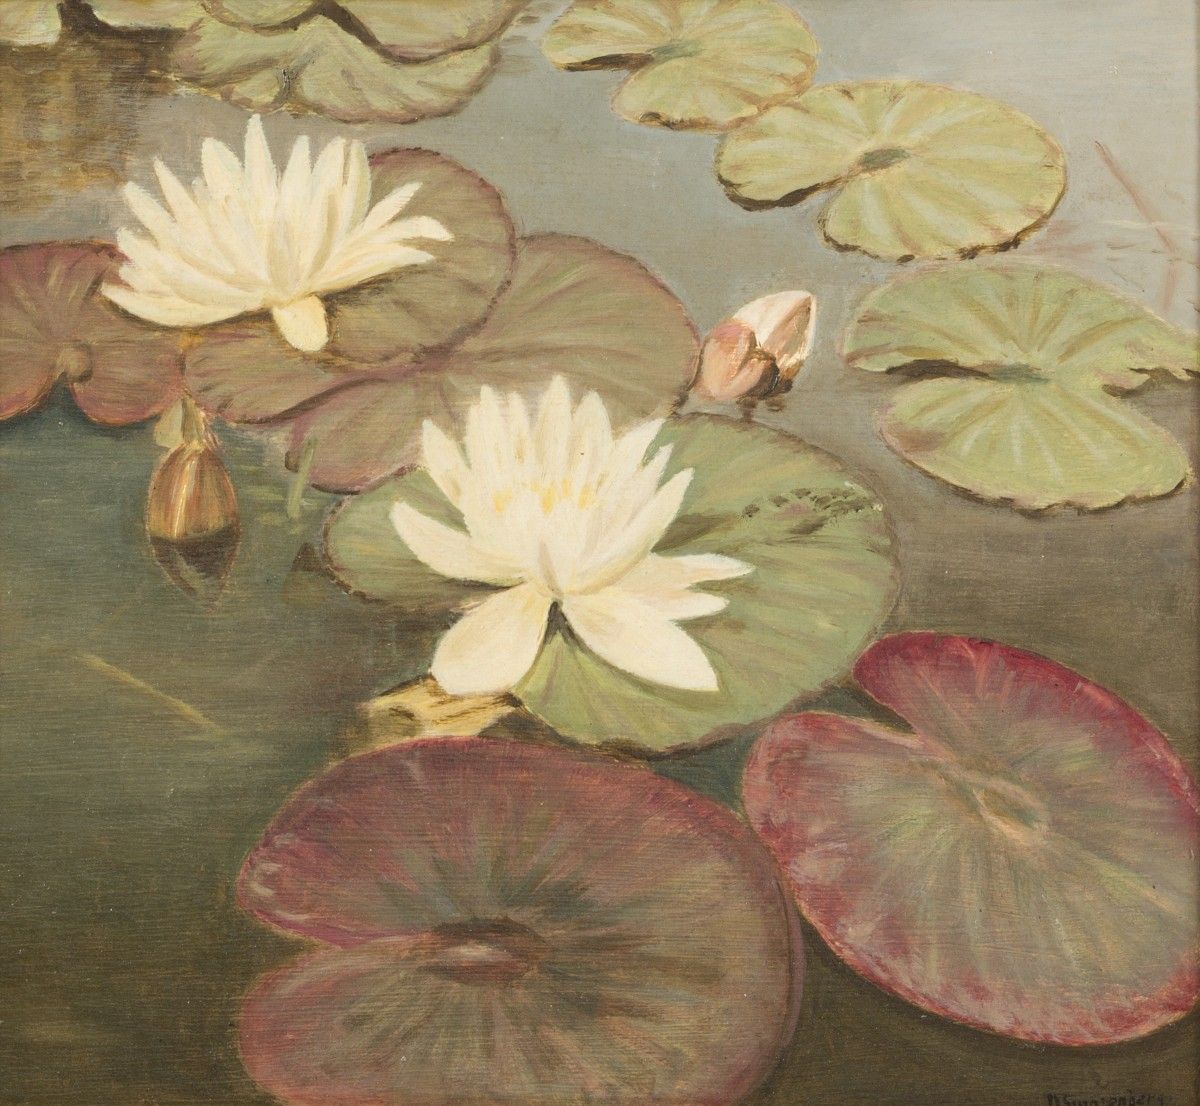 Attributed to D. Smorenberg, 20th. C.. Water lillies. Con firma (abajo a la dere&hellip;